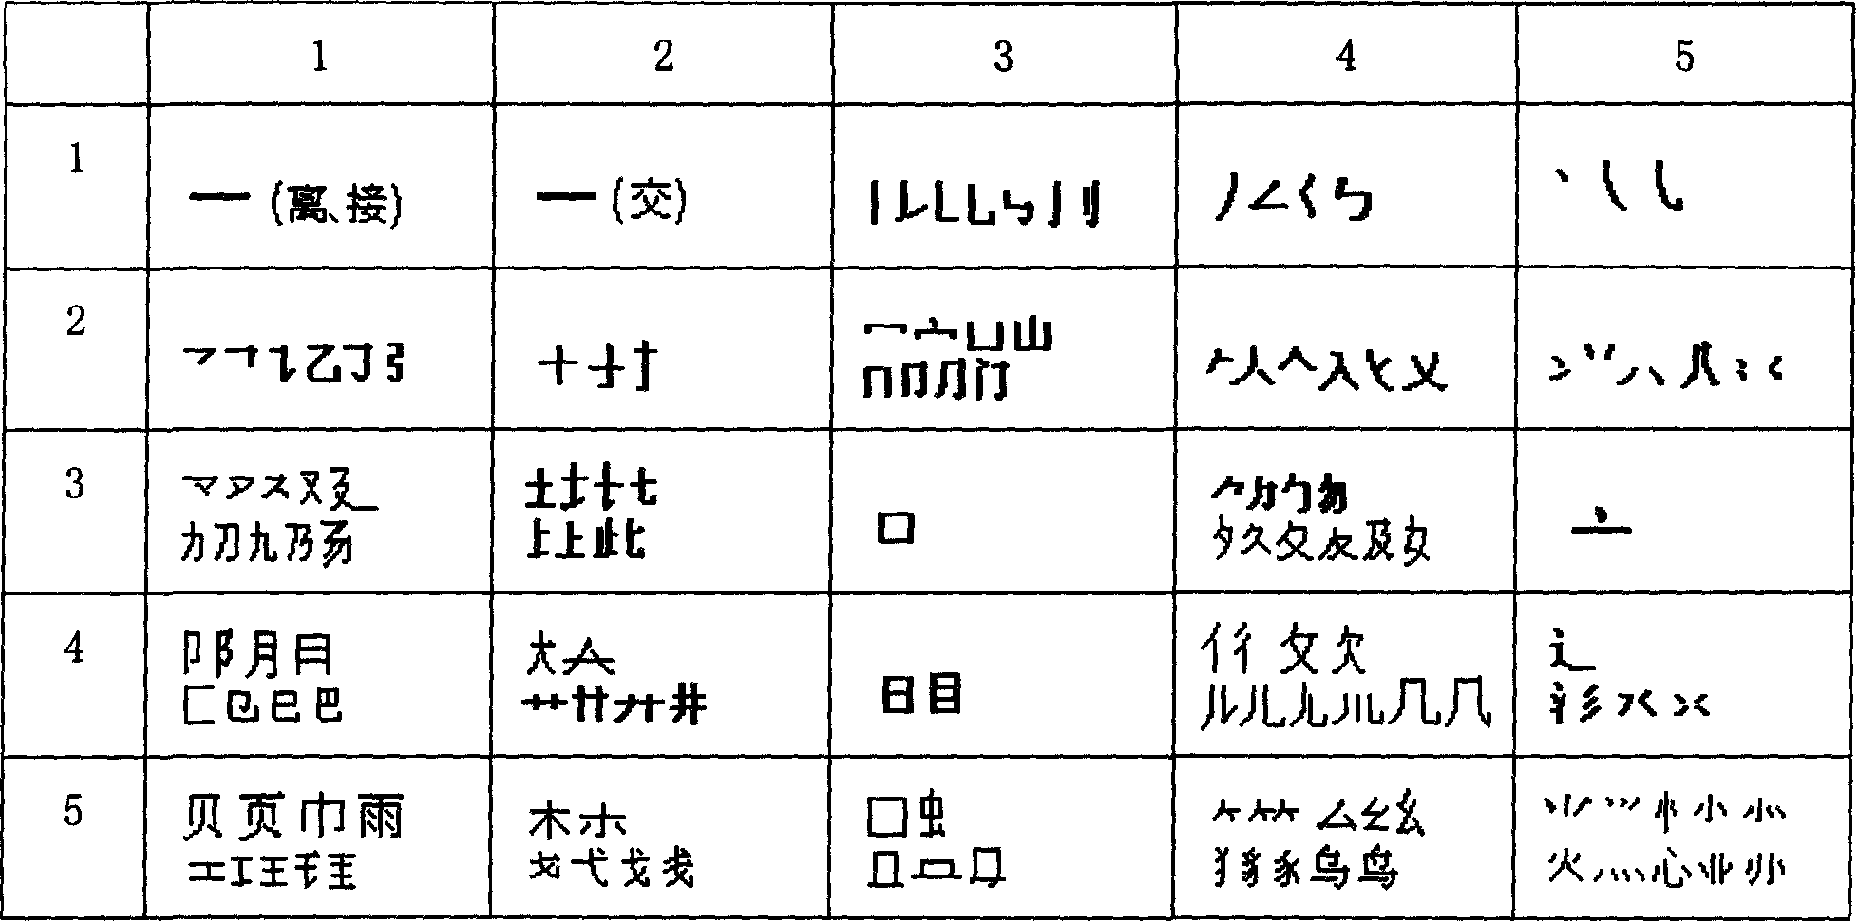 'He' code Chinese character numerical inputting method